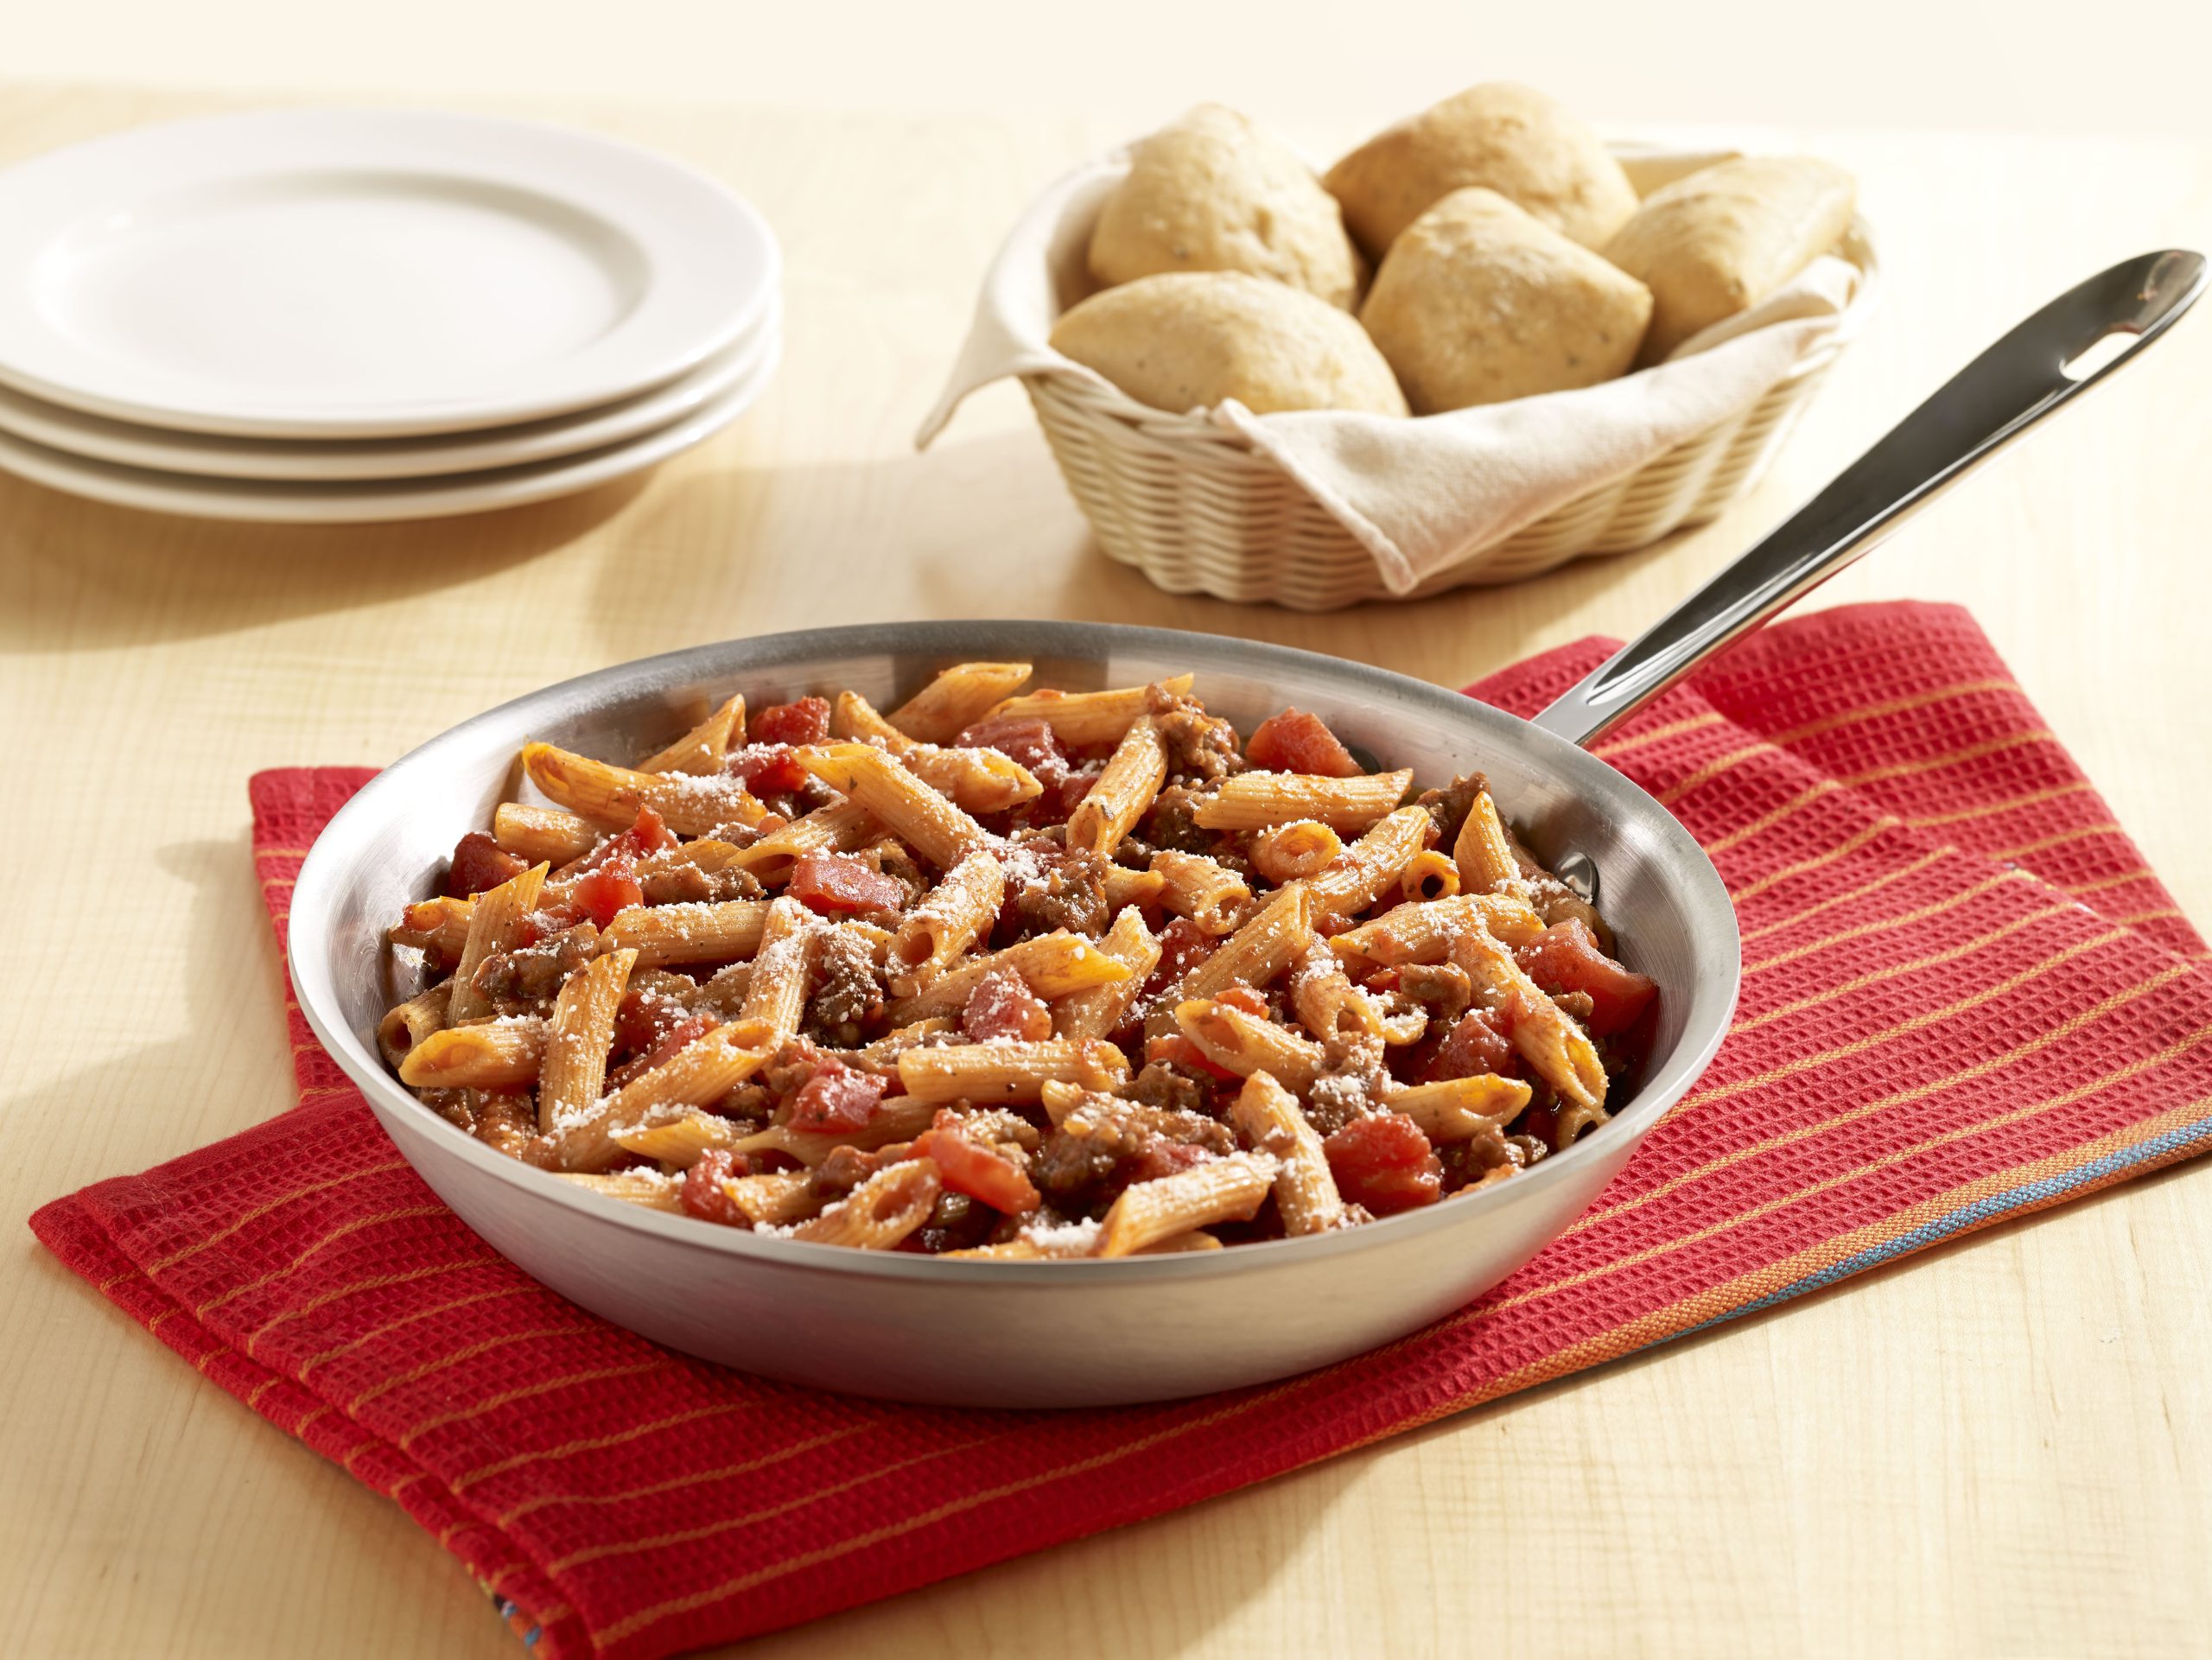 Penne pasta with Italian sausage and tomatoes in a light tomato sauce, sprinkled with Parmesan cheese